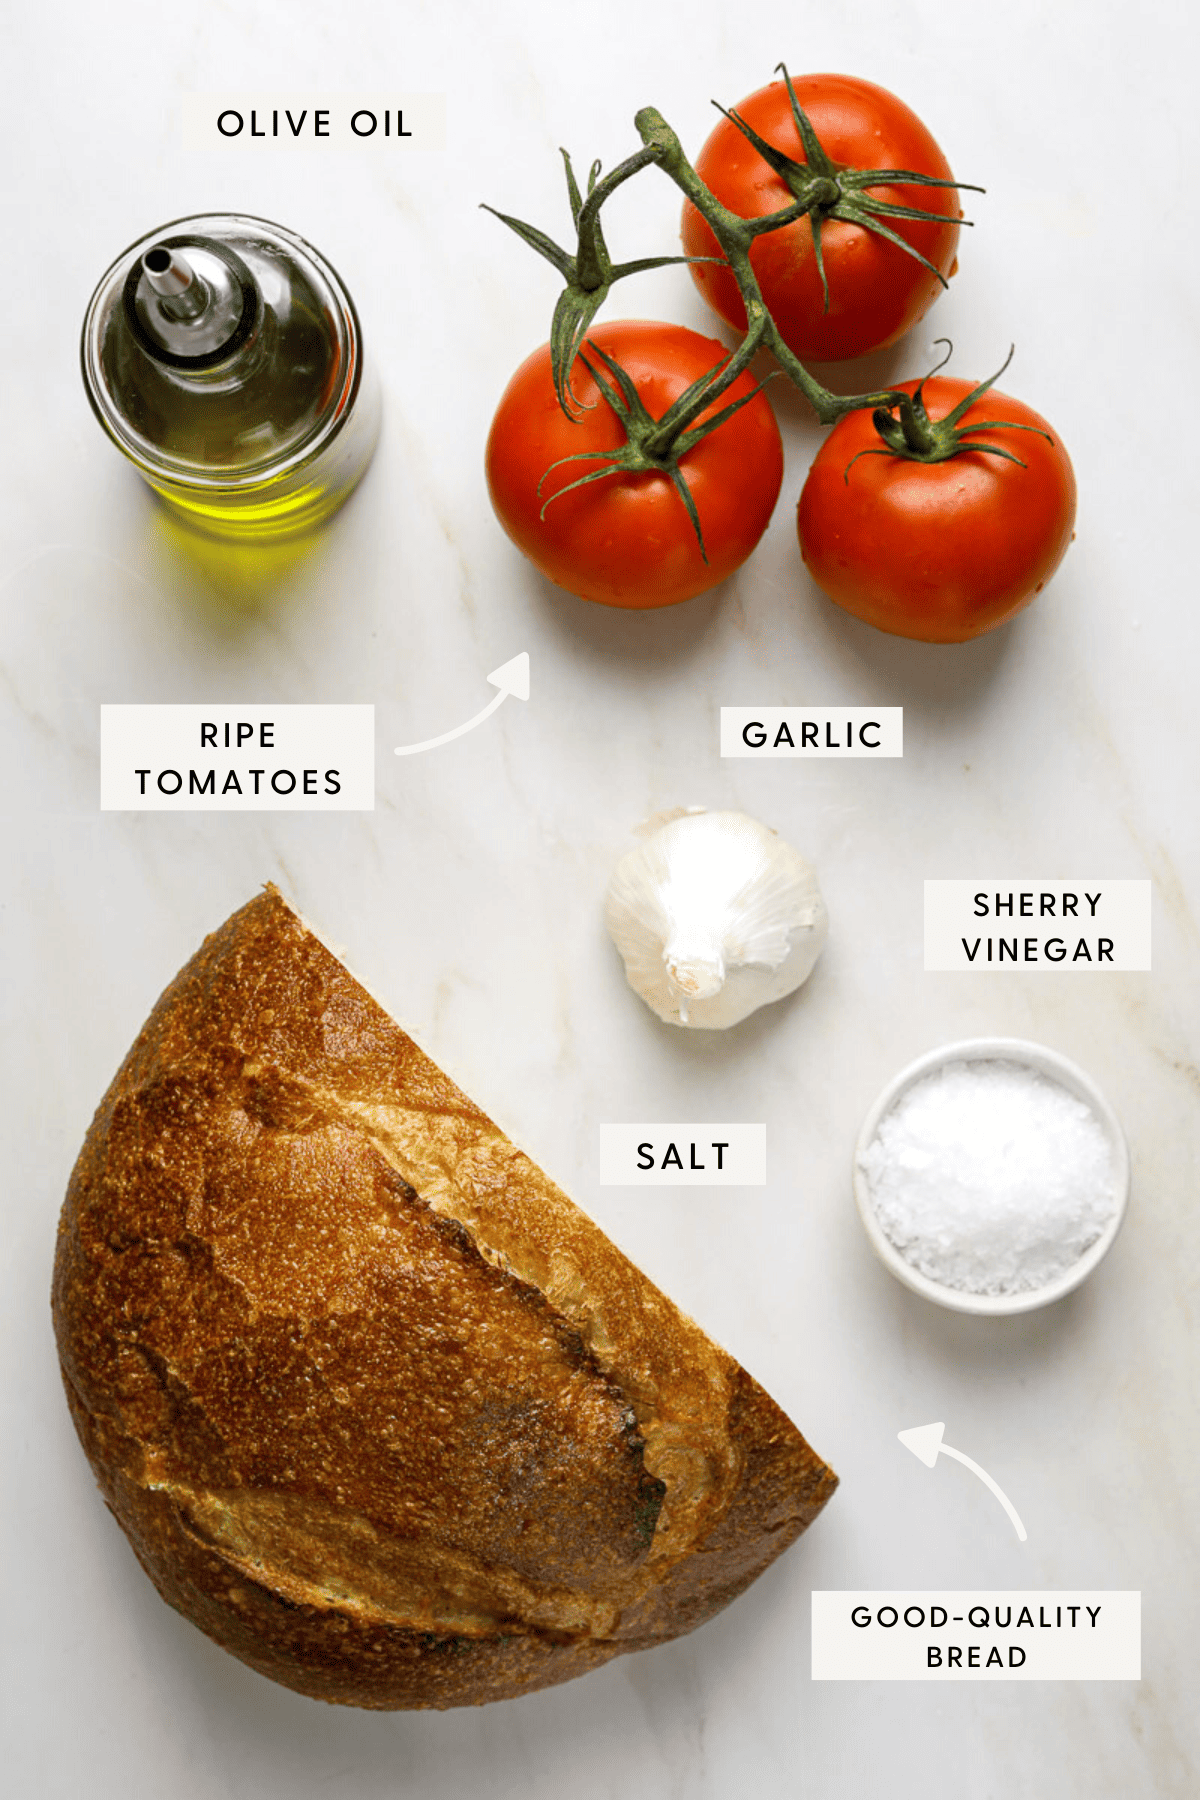 Half a loaf of bread, a bunch of three ripe tomatoes on the vine, a bottle of olive oil, a bulb of garlic and a bowl of flakey sea salt.